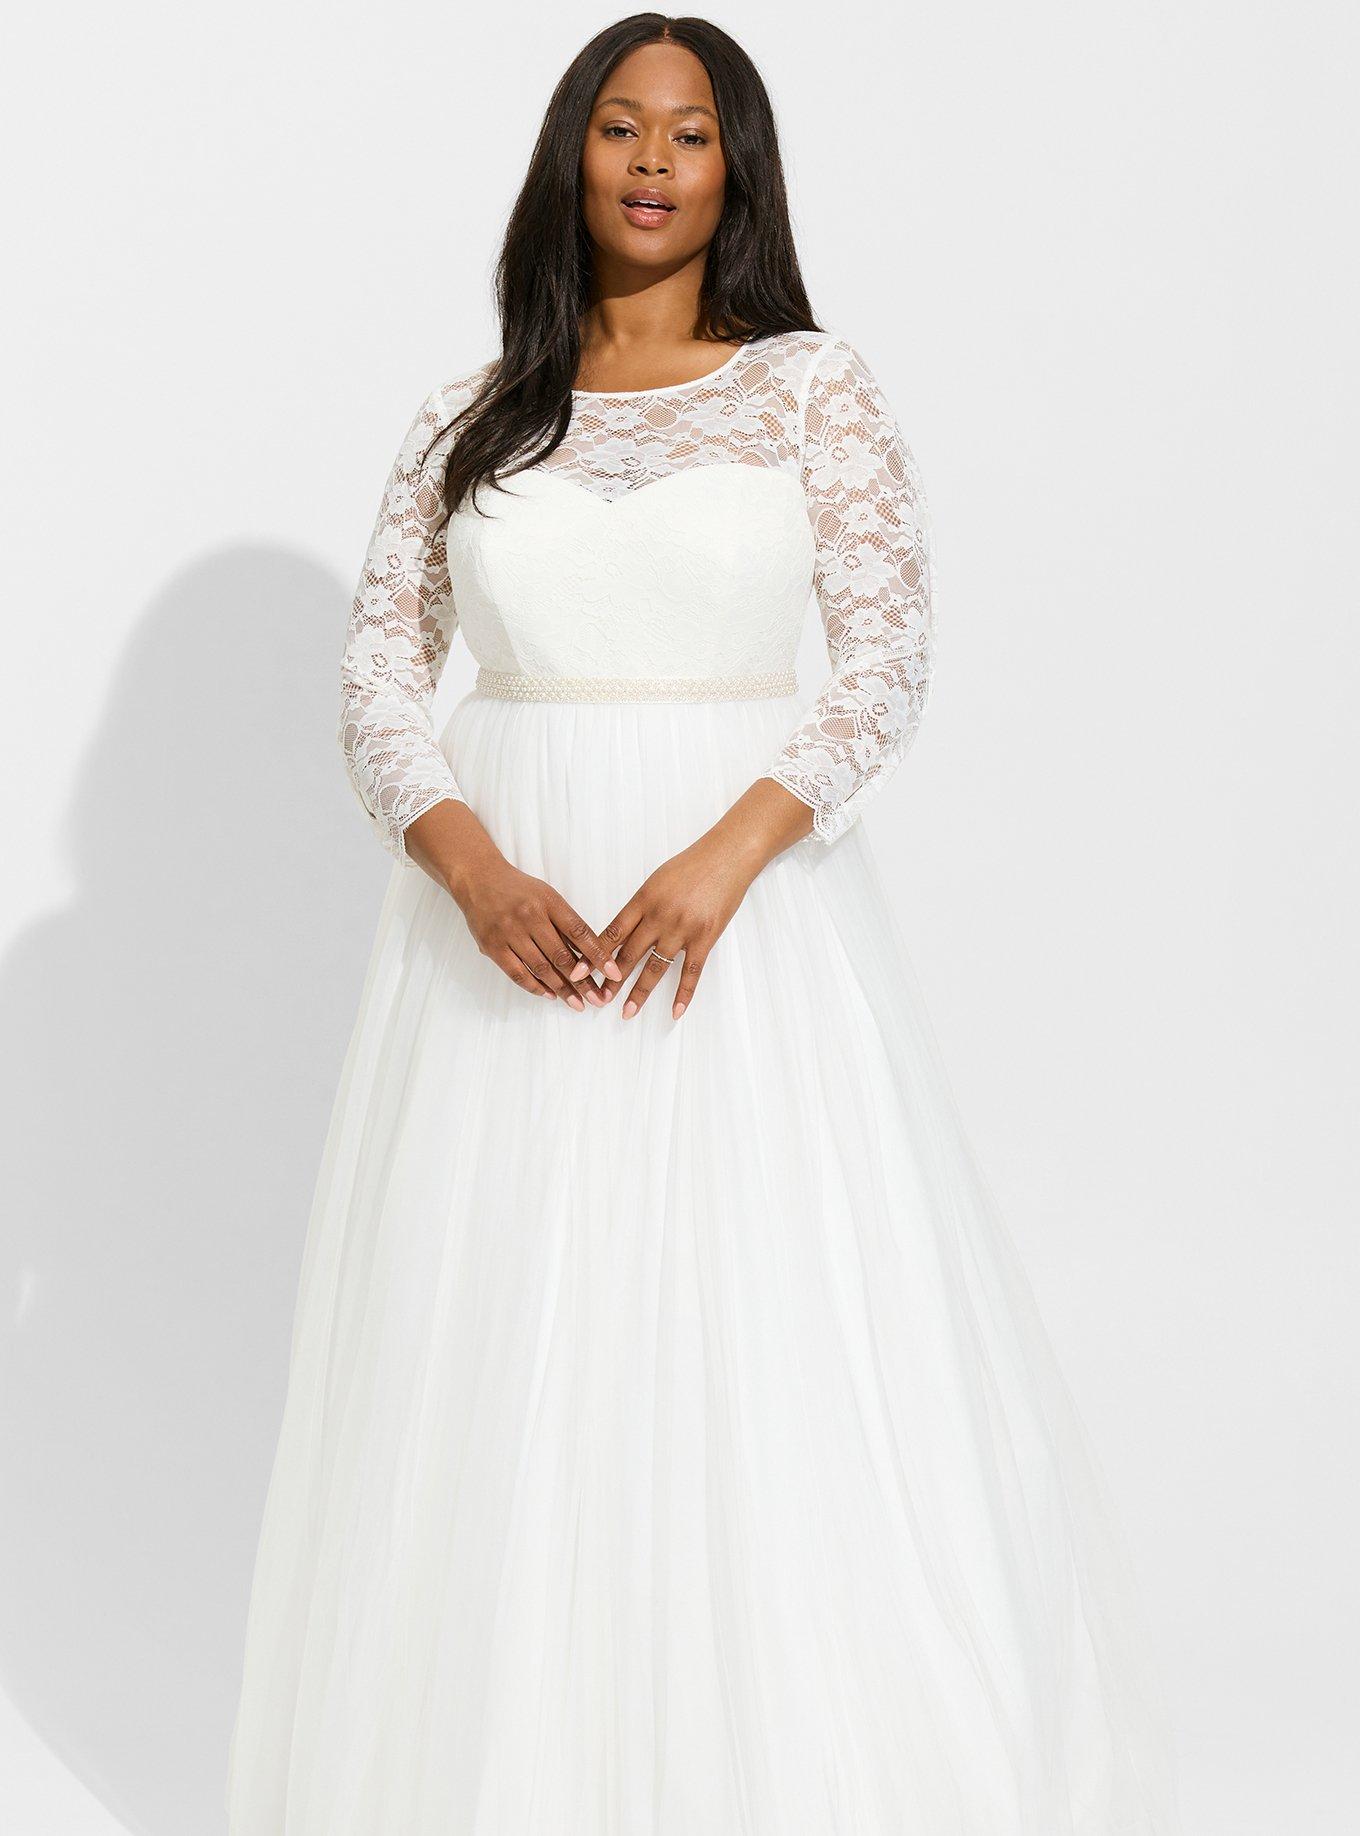 Plus Size Clothing Ideas for different occasion - Indian Wear  Plus size  wedding gowns, Plus size gowns, Plus size ball gown